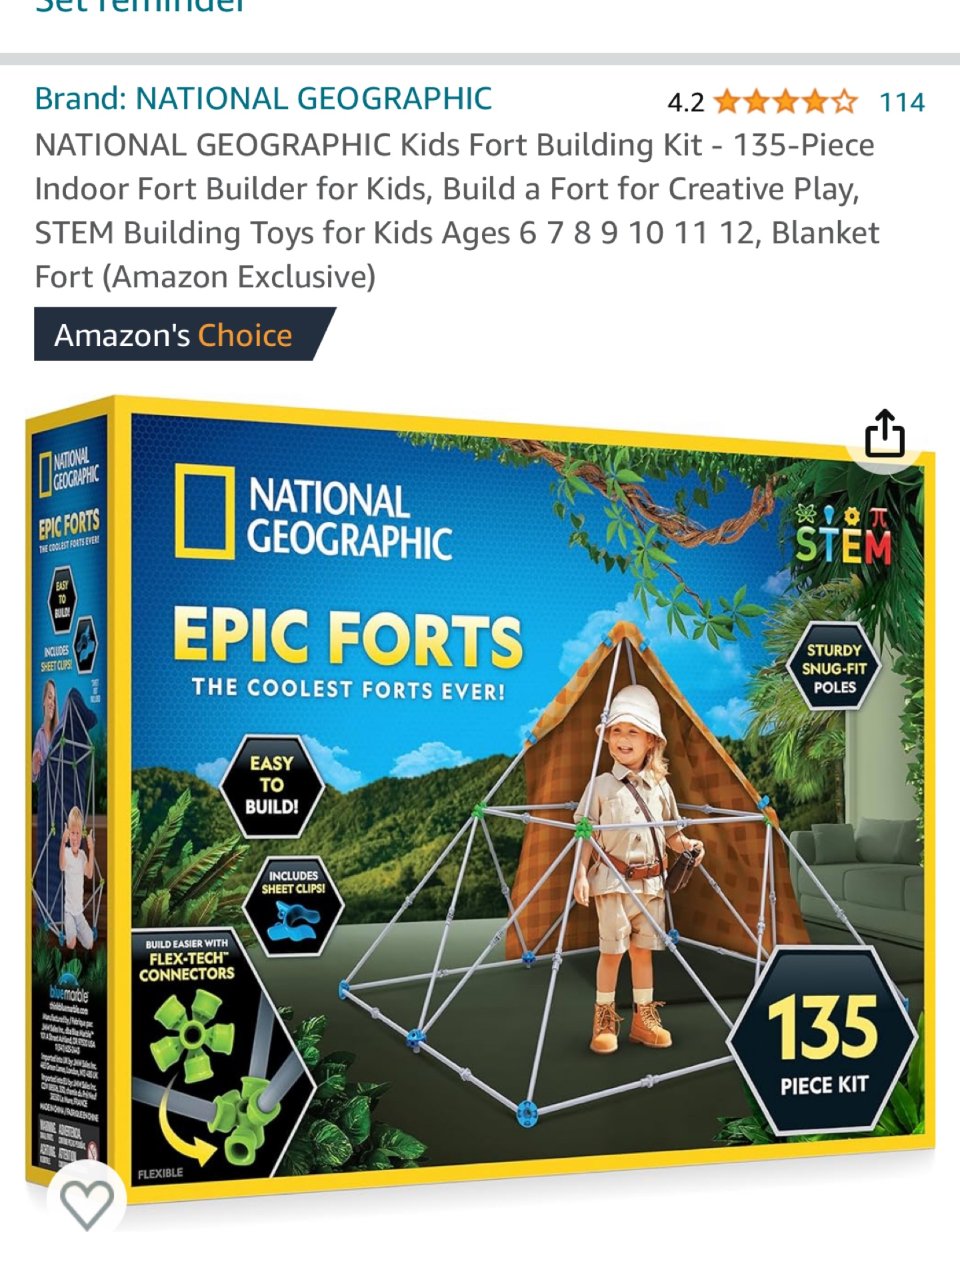 NATIONAL GEOGRAPHIC Kids Fort Building Kit - 135-Piece Indoor Fort Builder for Kids, Build a Fort for Creative Play, STEM Building Toys for Kids Ages 6 7 8 9 10 11 12, Blanket Fort (Amazon Exclusive) : Toys & Games